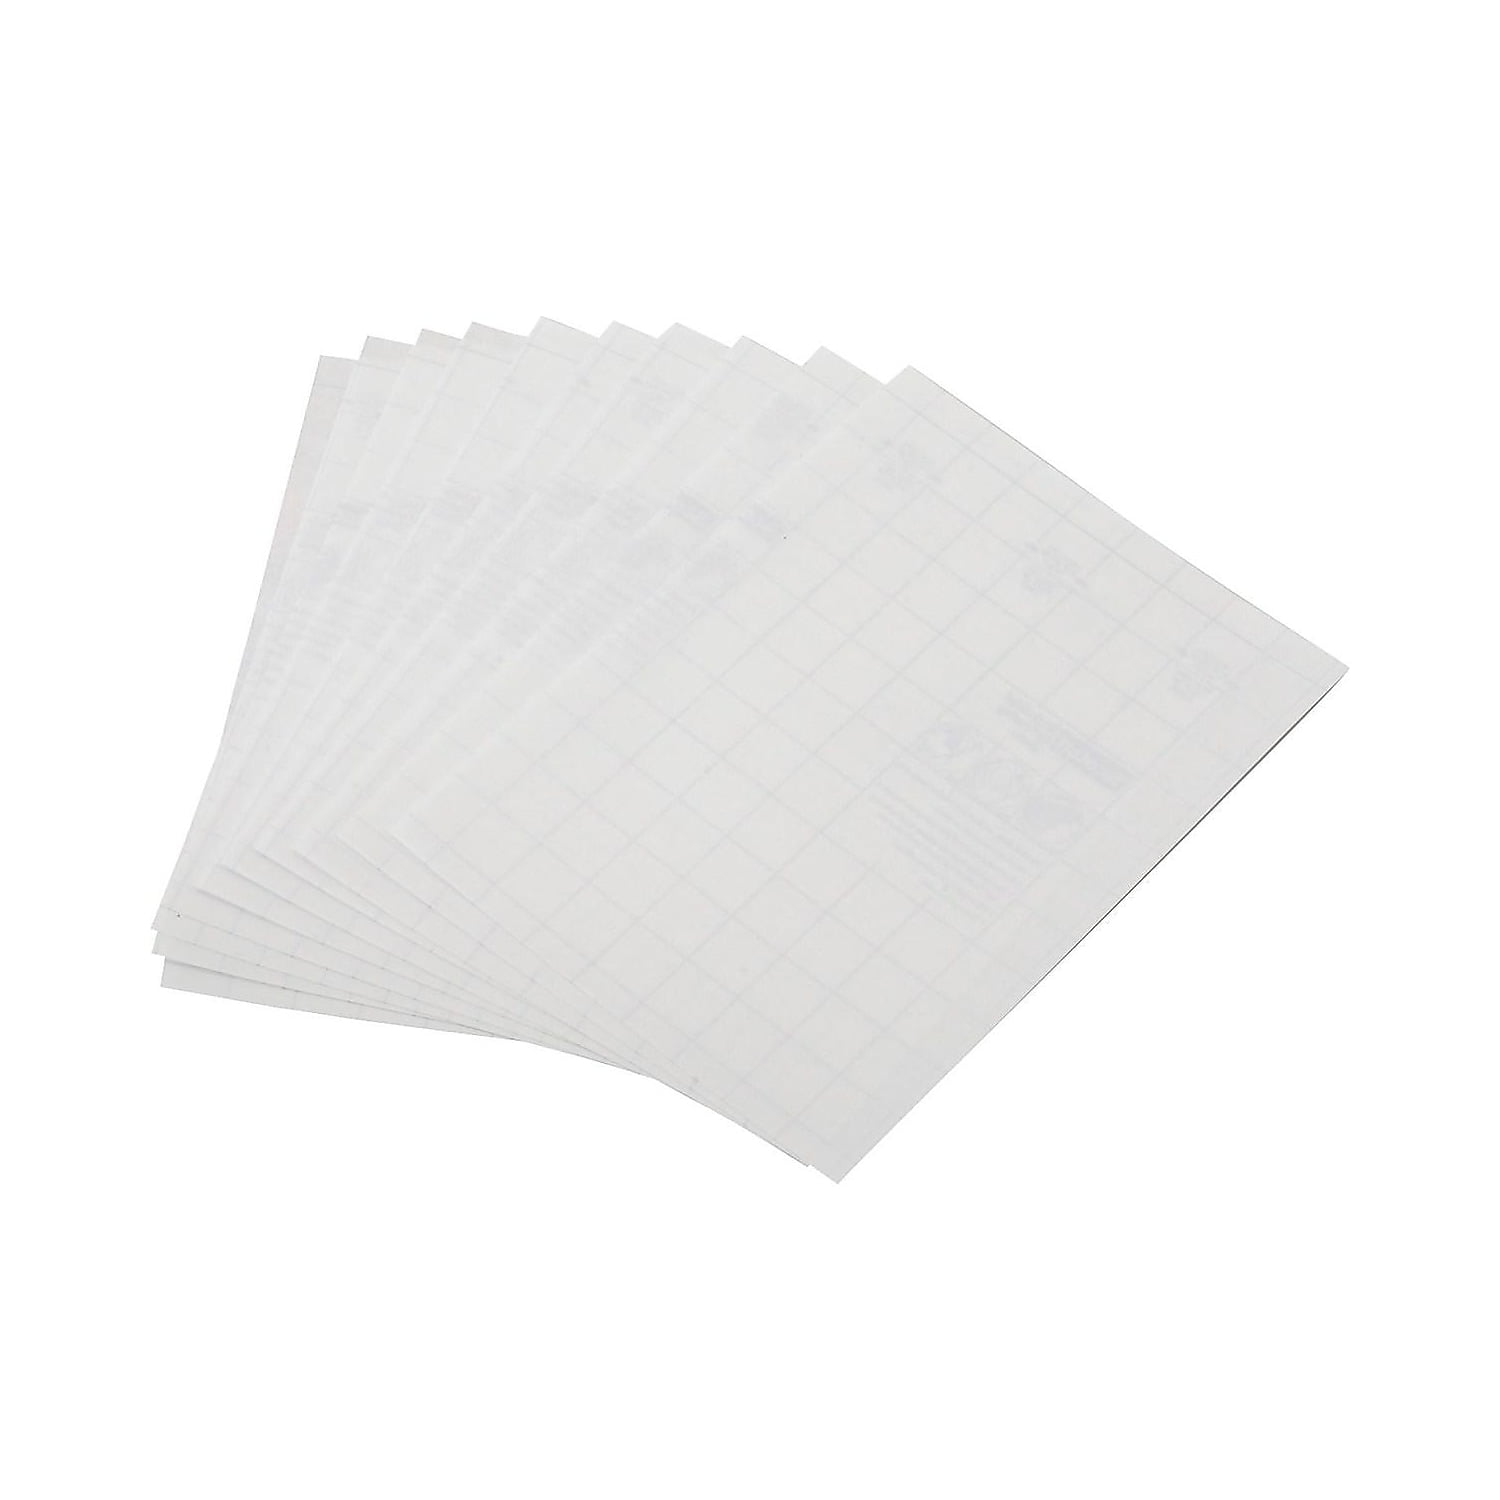 VHALE Glossy Clear Self-adhesive Overlay Laminating Sheet Contact Papers, 7  X 8 Inches, 3.15 Mil, Pack of 100 